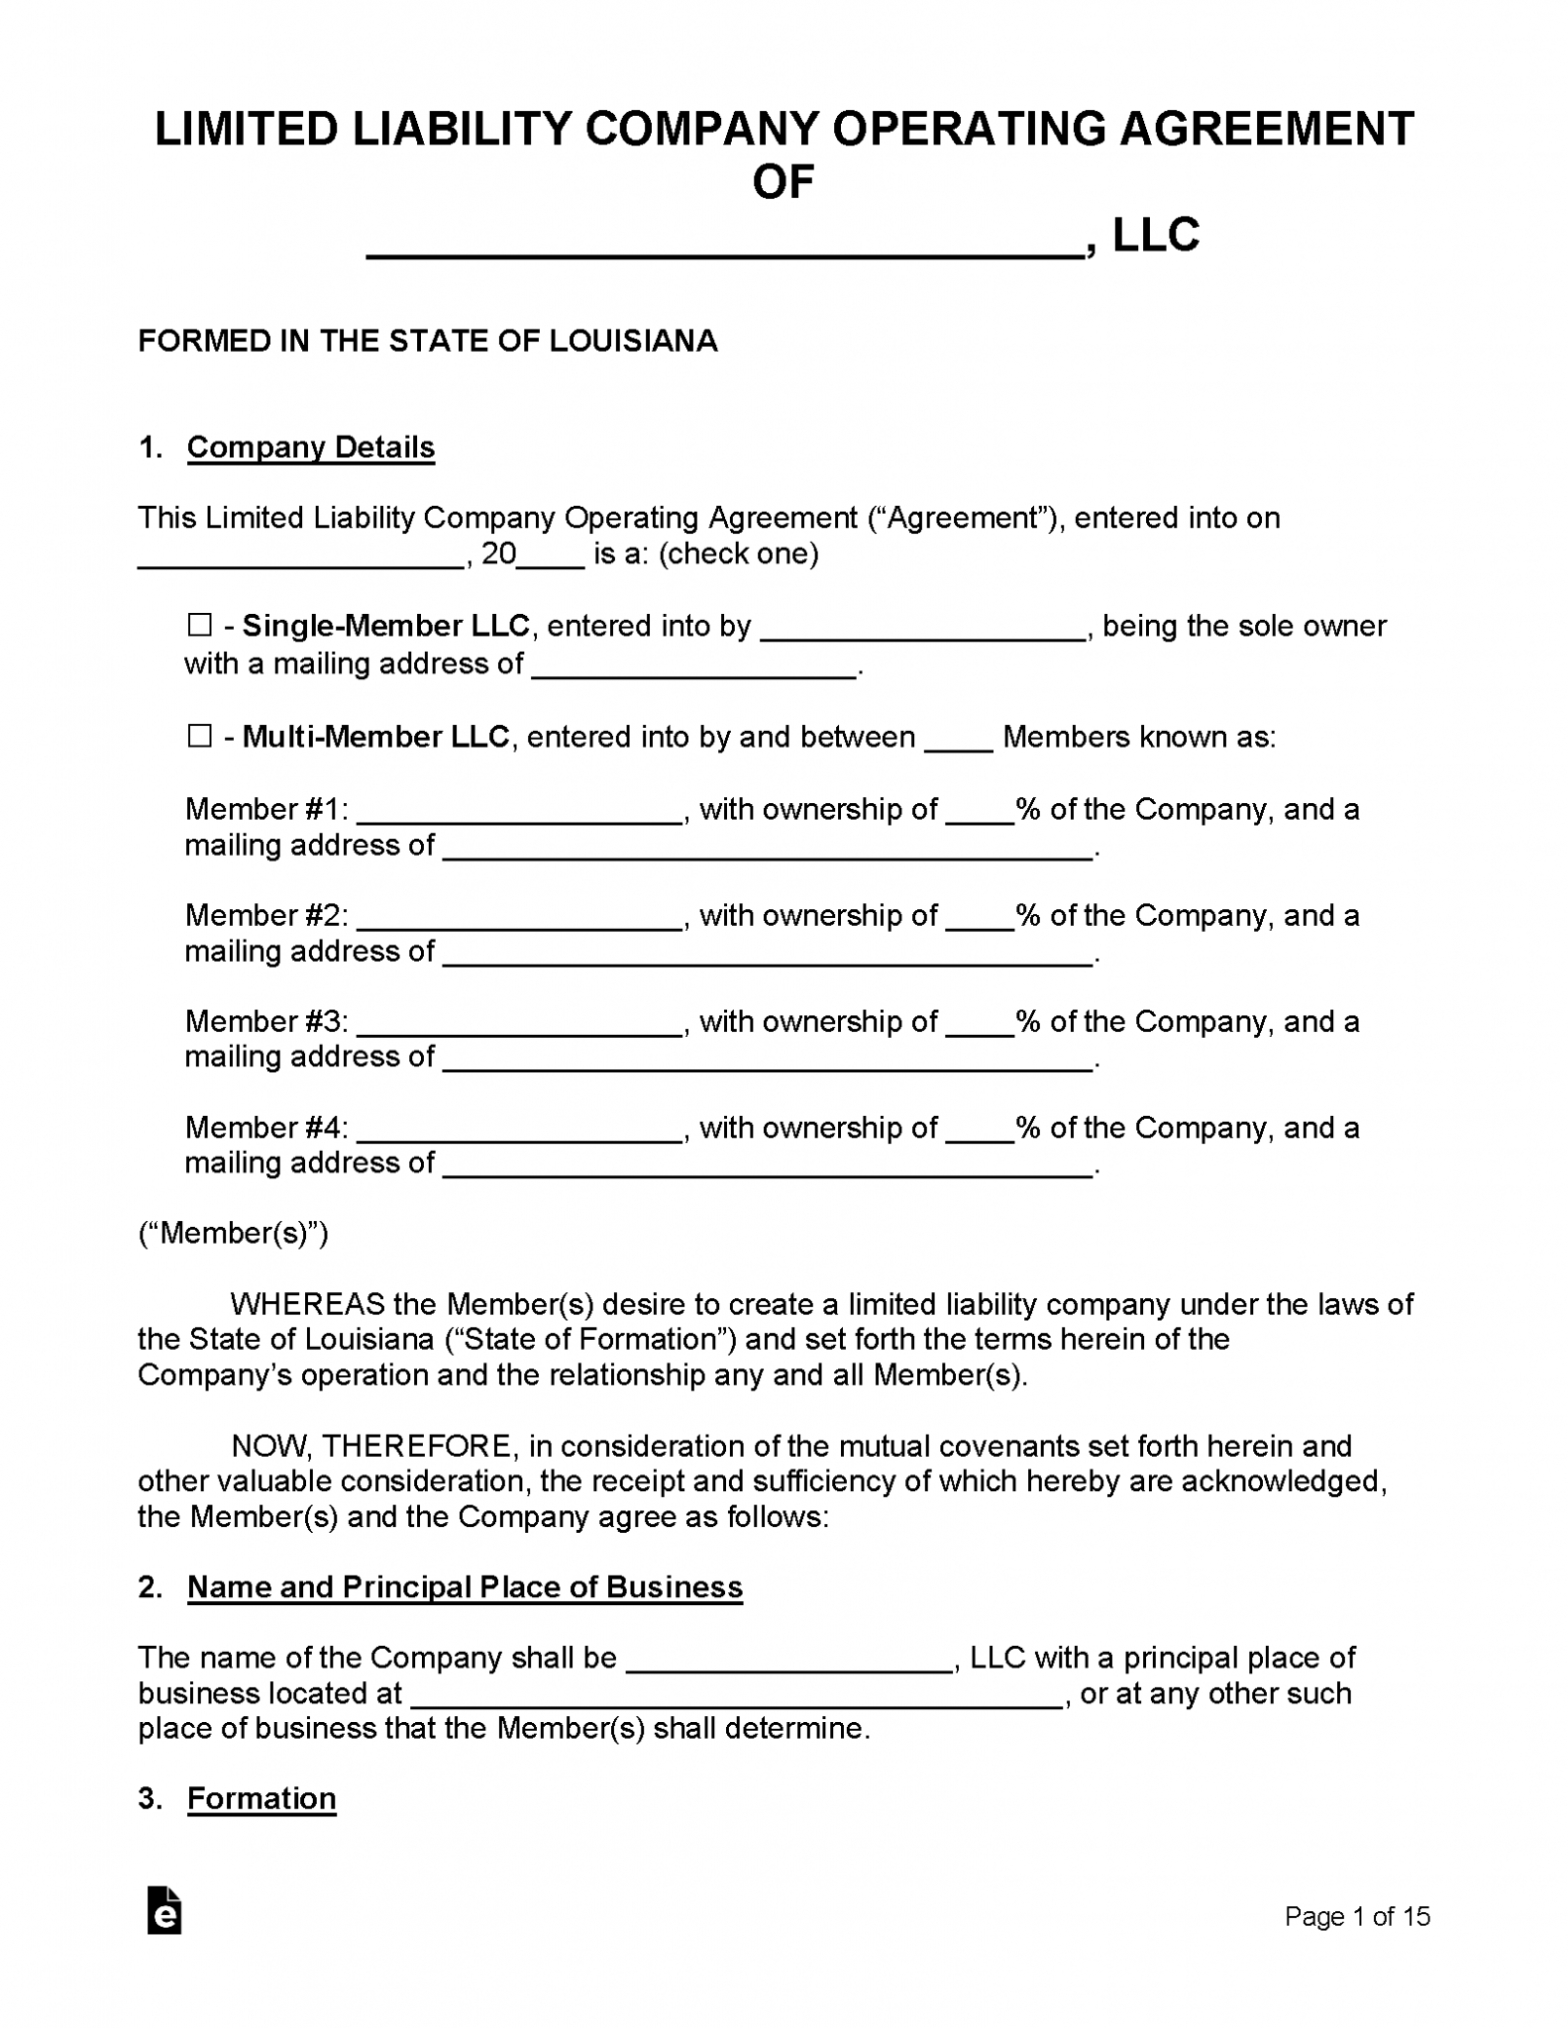 Free Louisiana Llc Operating Agreement Templates - Pdf | Word - Eforms Intended For Corporation Operating Agreement Template